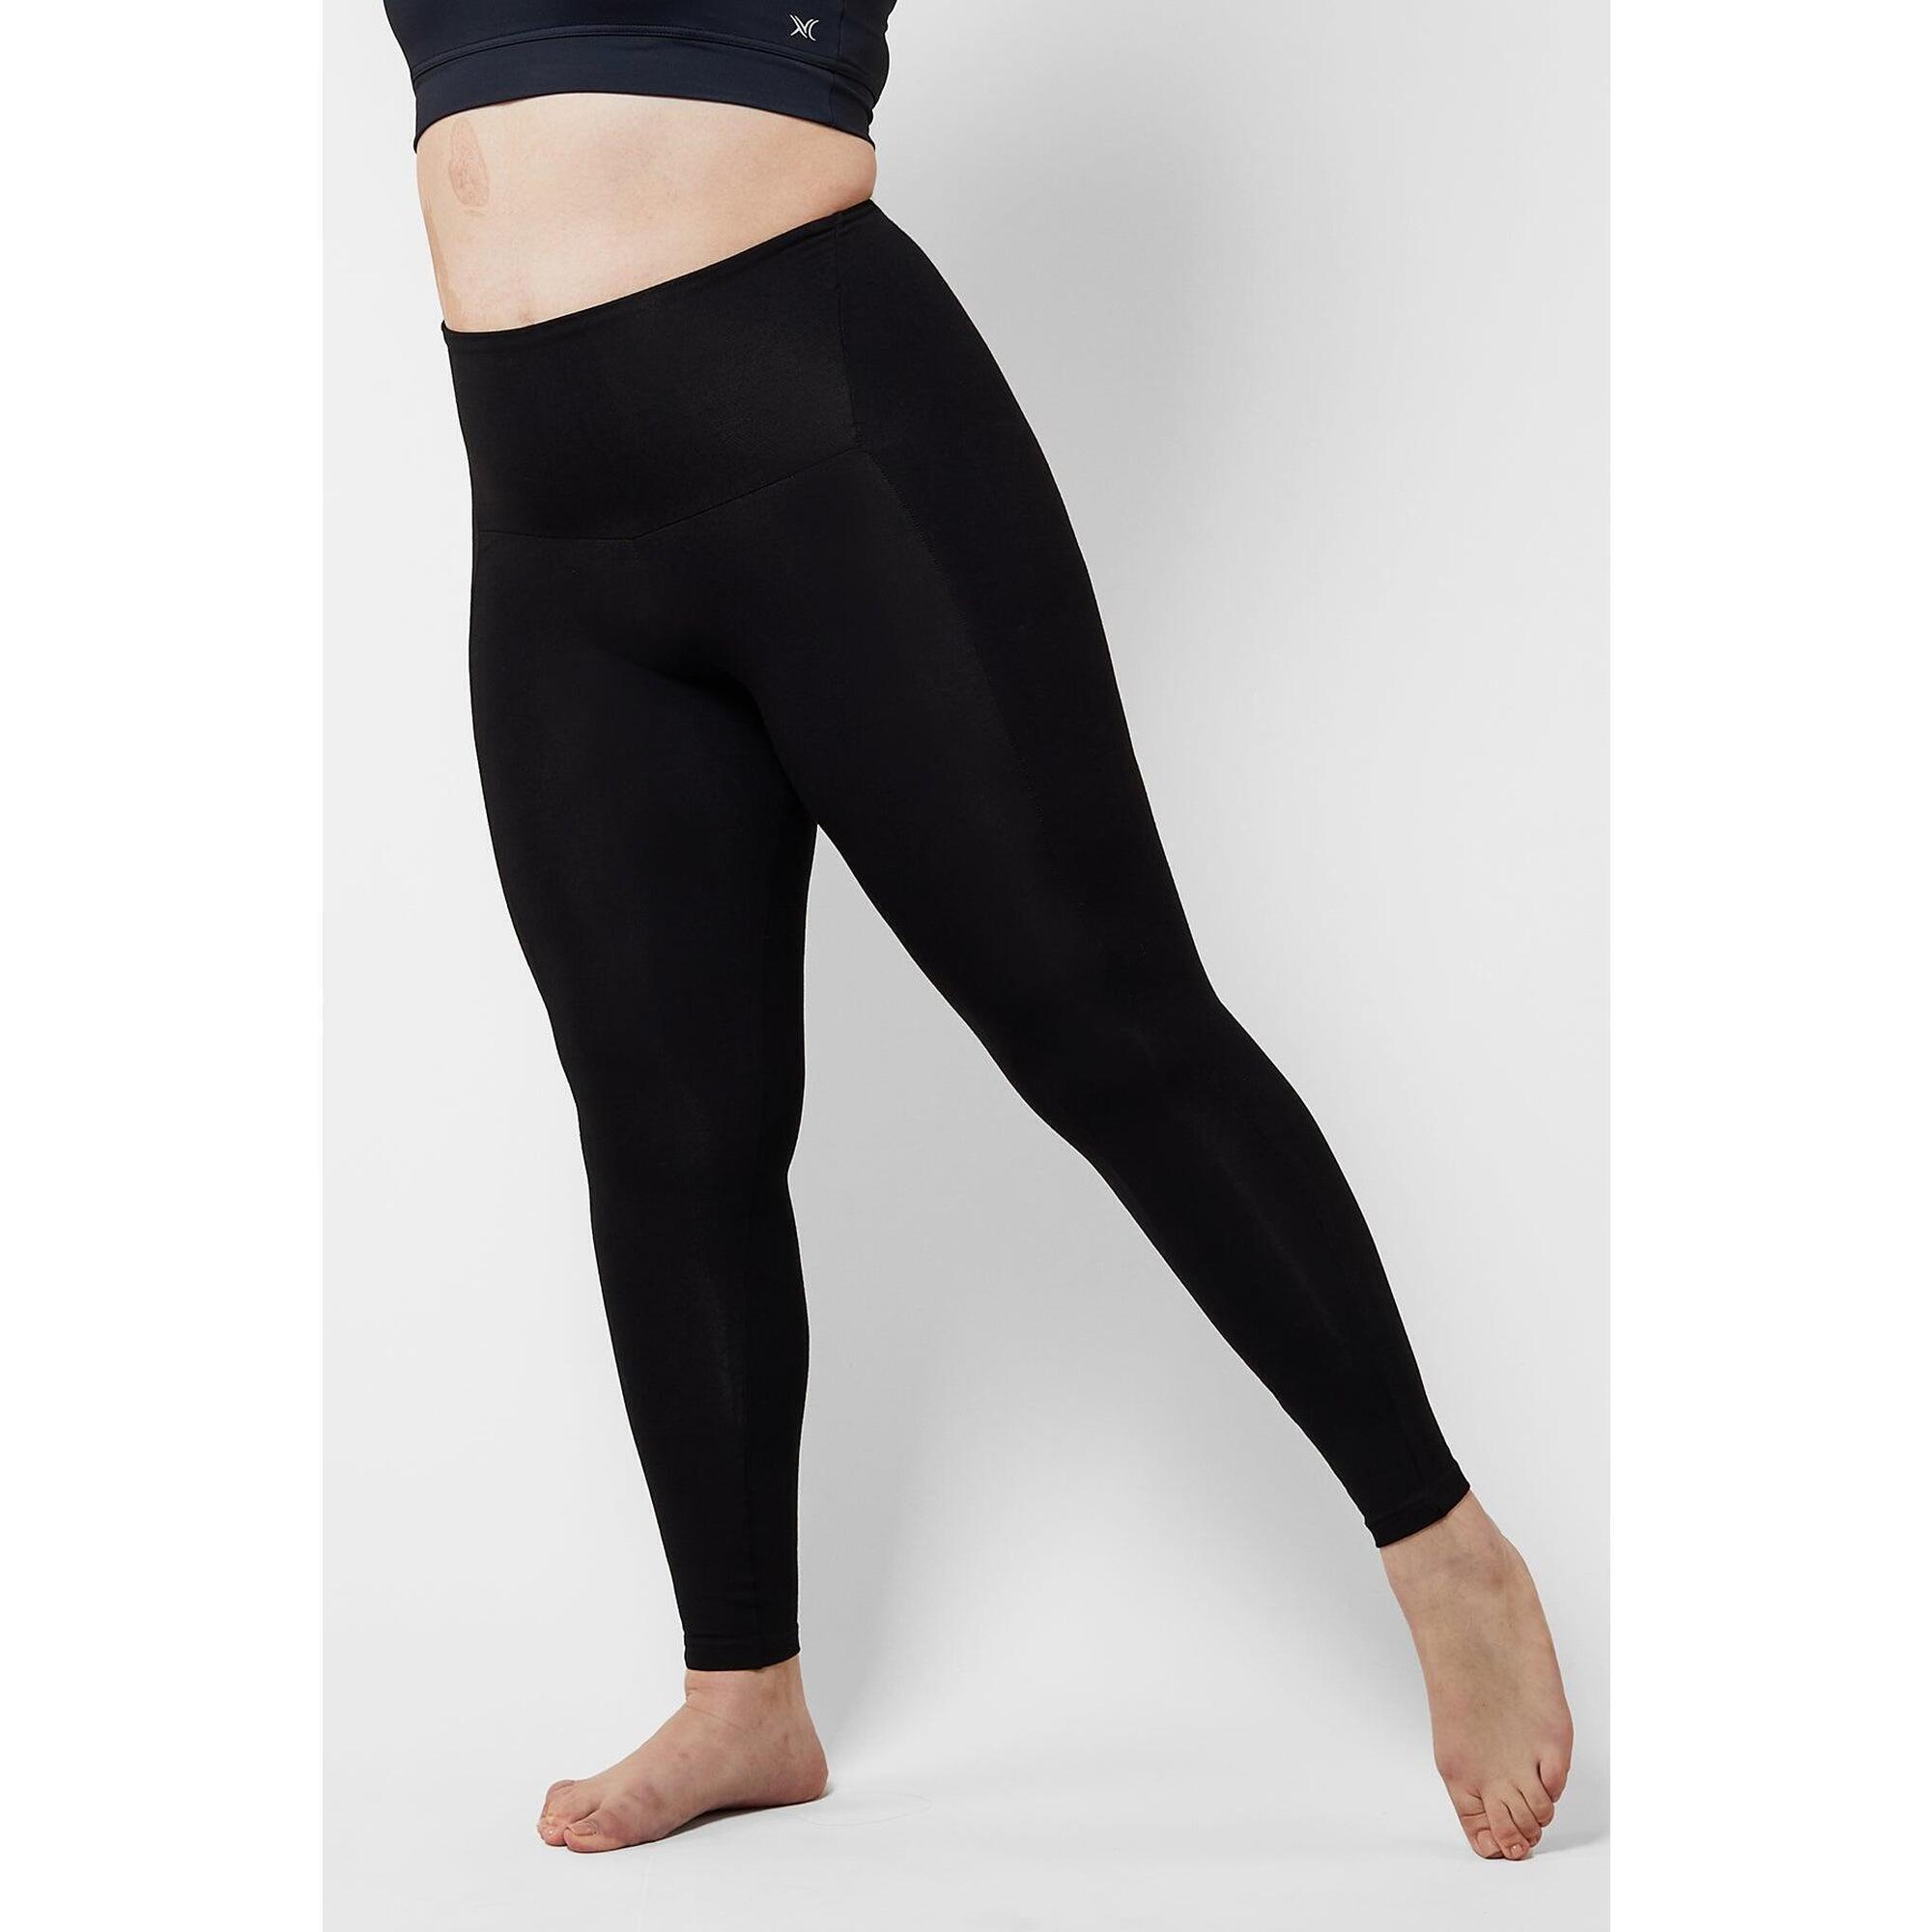 TLC SPORT Extra Strong Compression Outer-Thigh Smoothing Leggings with Tummy Control Black